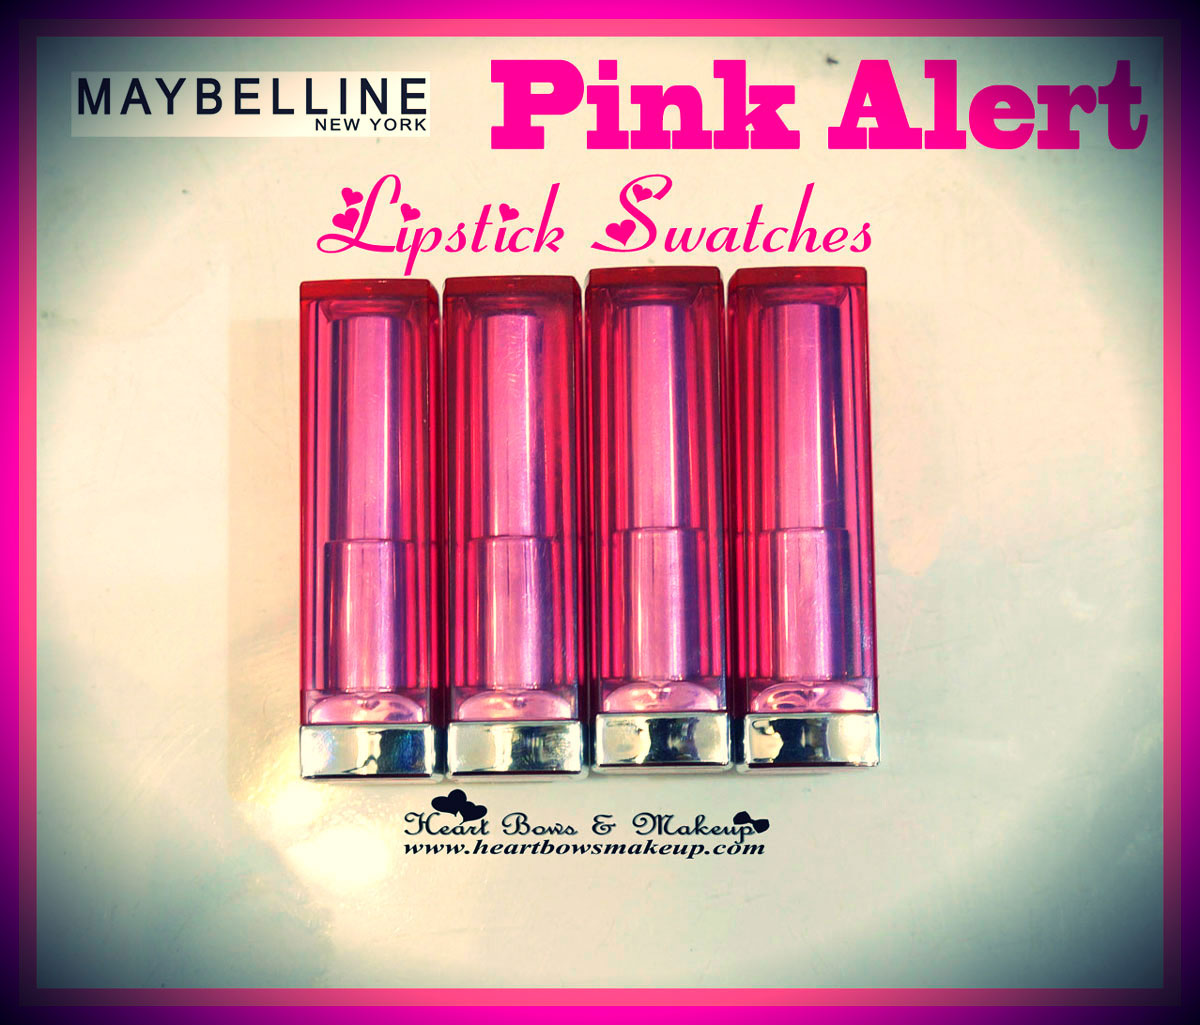 Best Makeup Launches of 2014: Maybelline Pink Alert POW Lipsticks